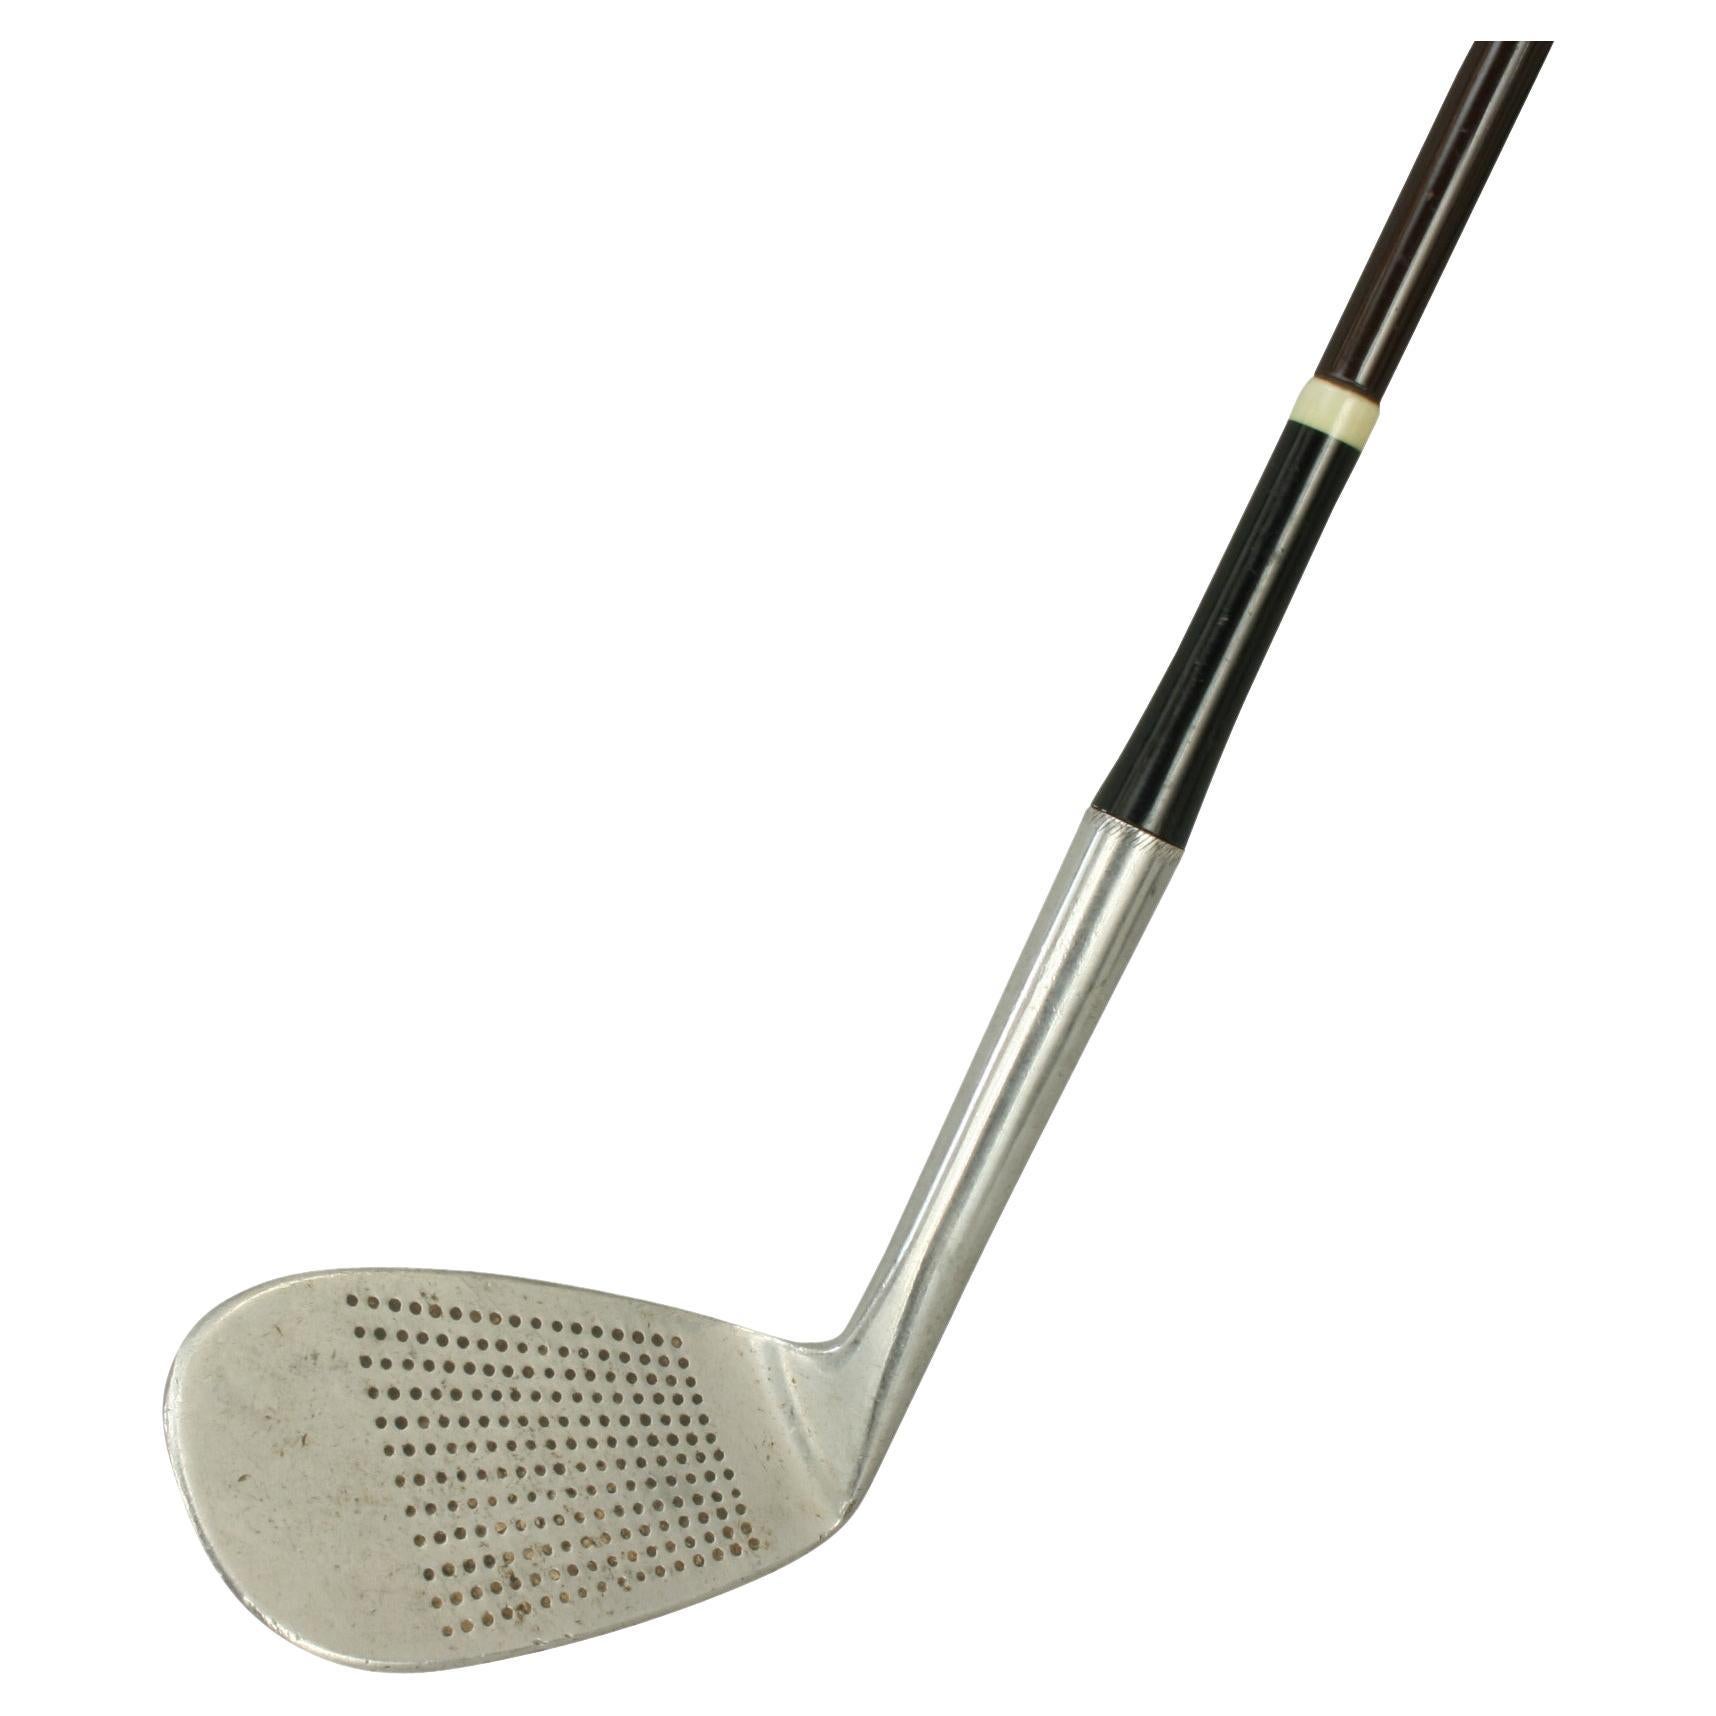 Steel Shafted Tom Morris Golf Club, St Andrews For Sale